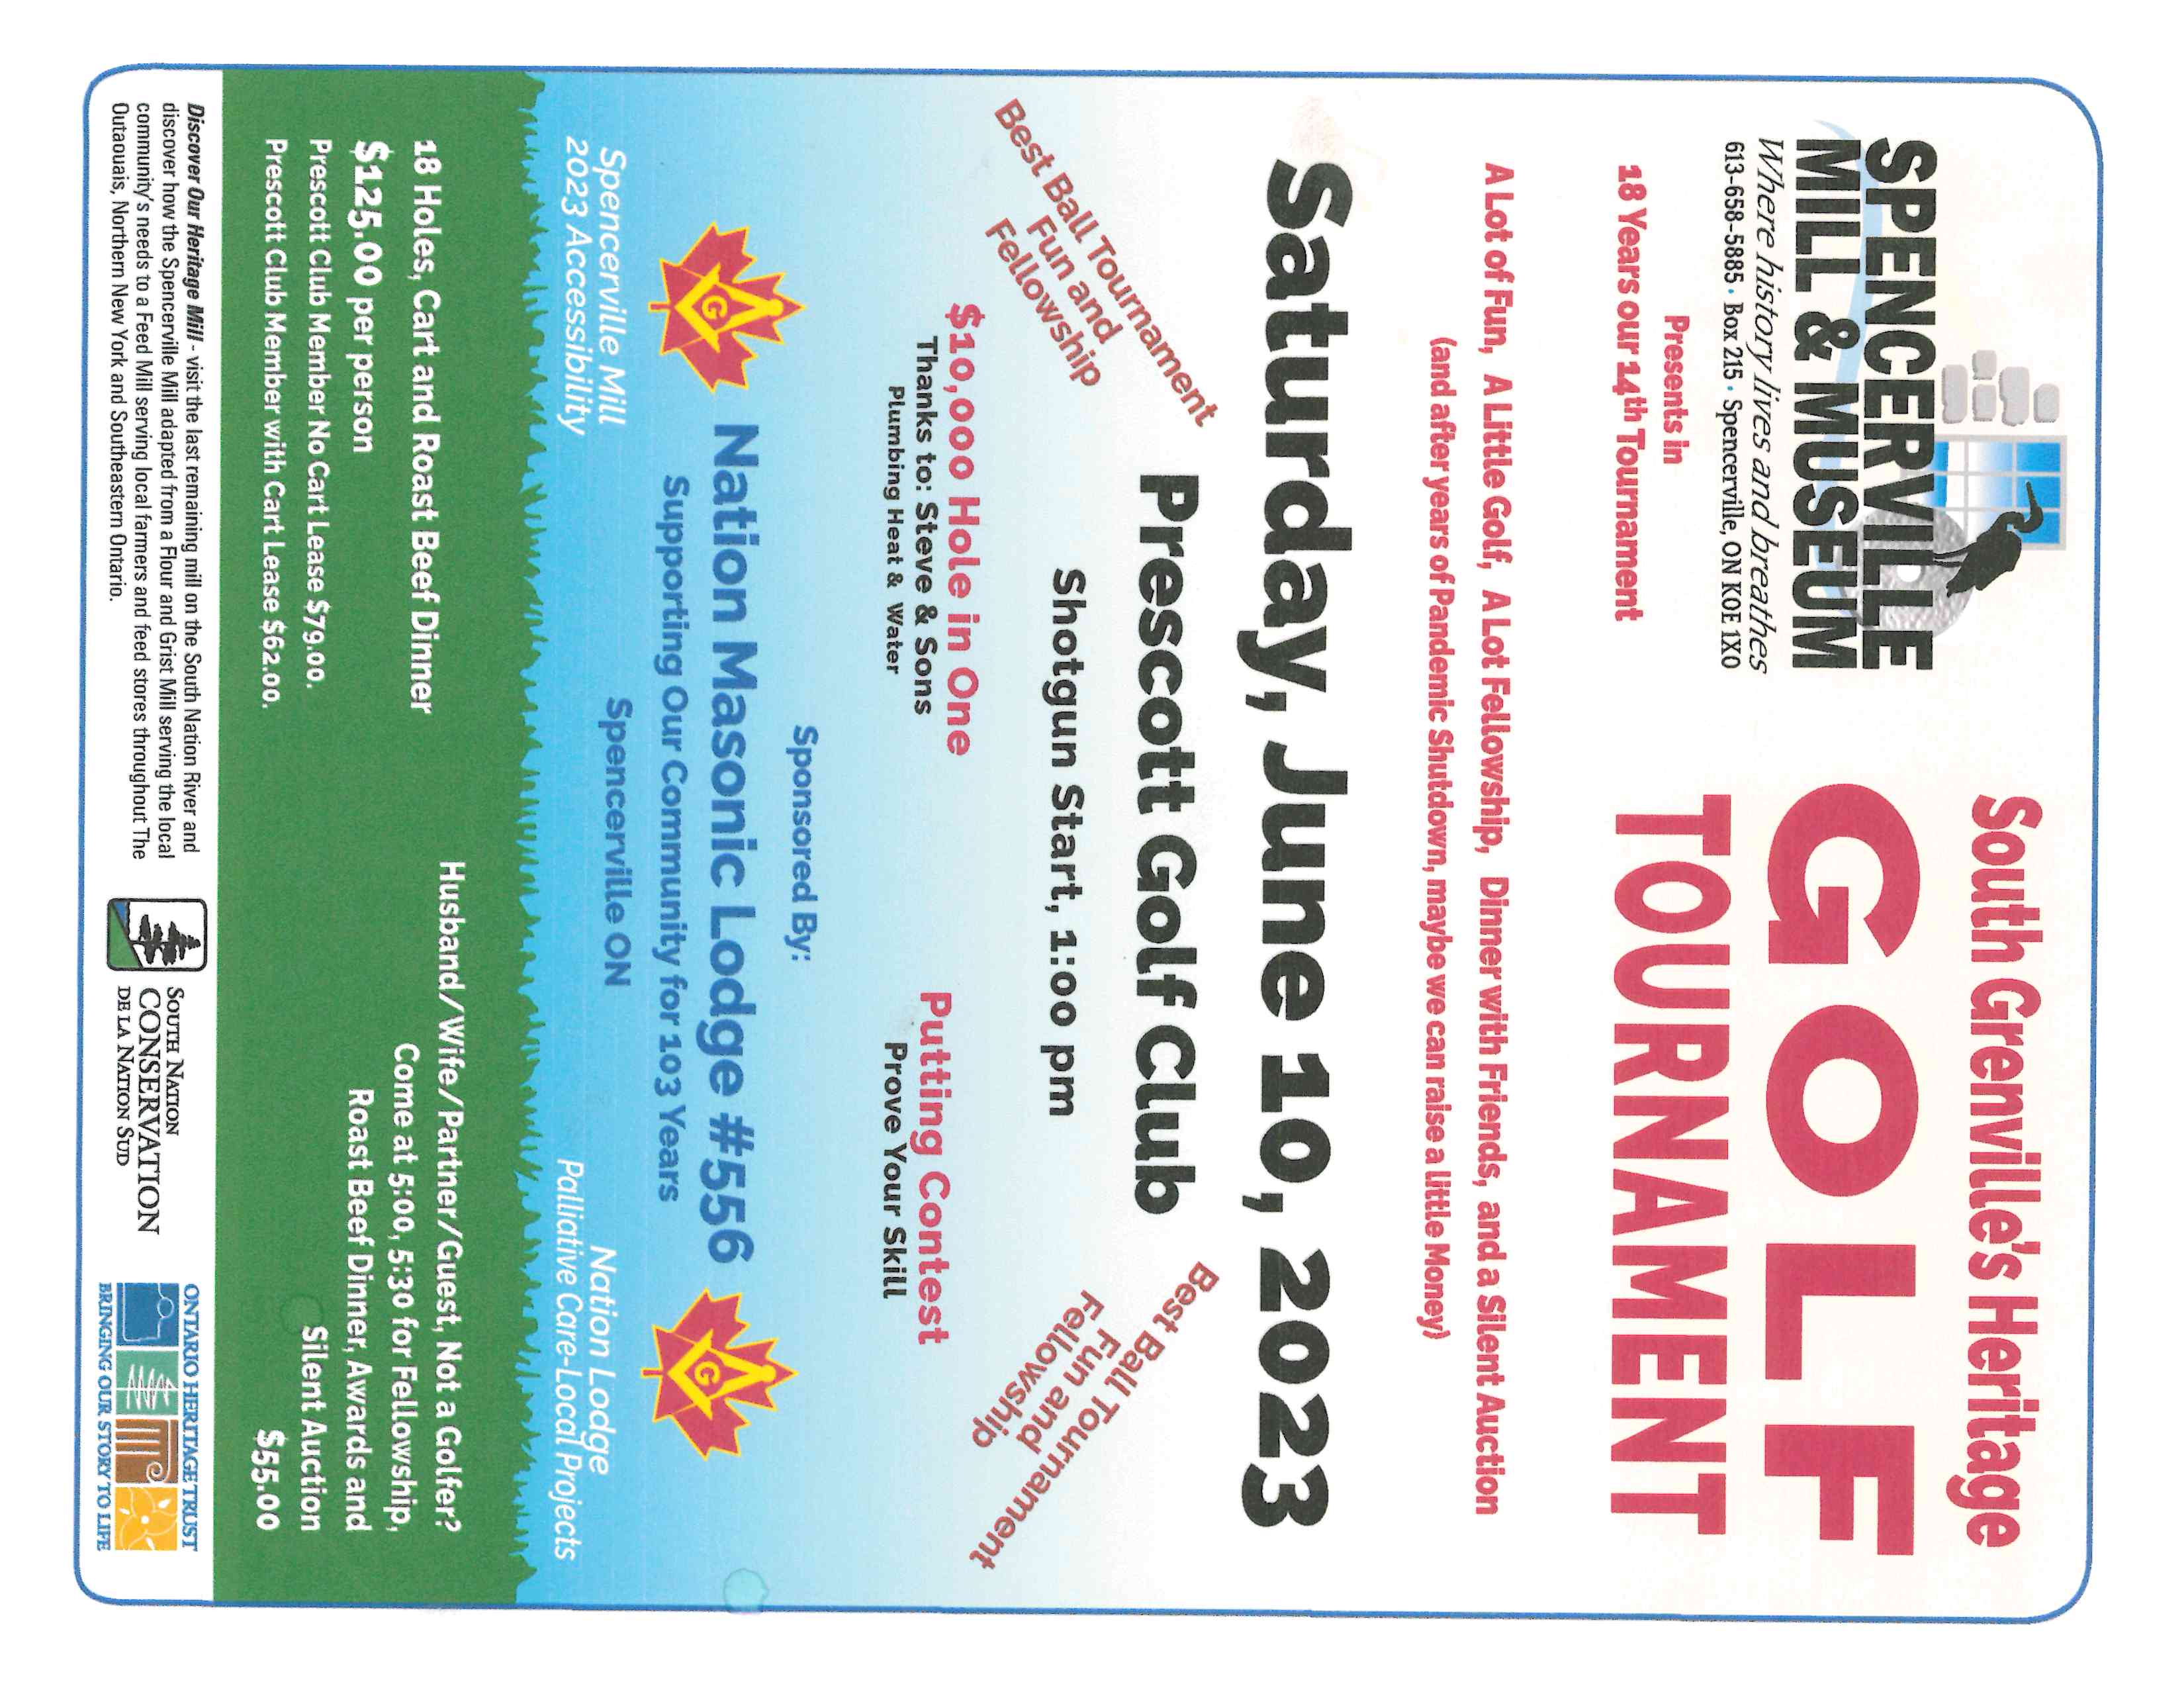 South Grenville's Heritage Golf Tournament